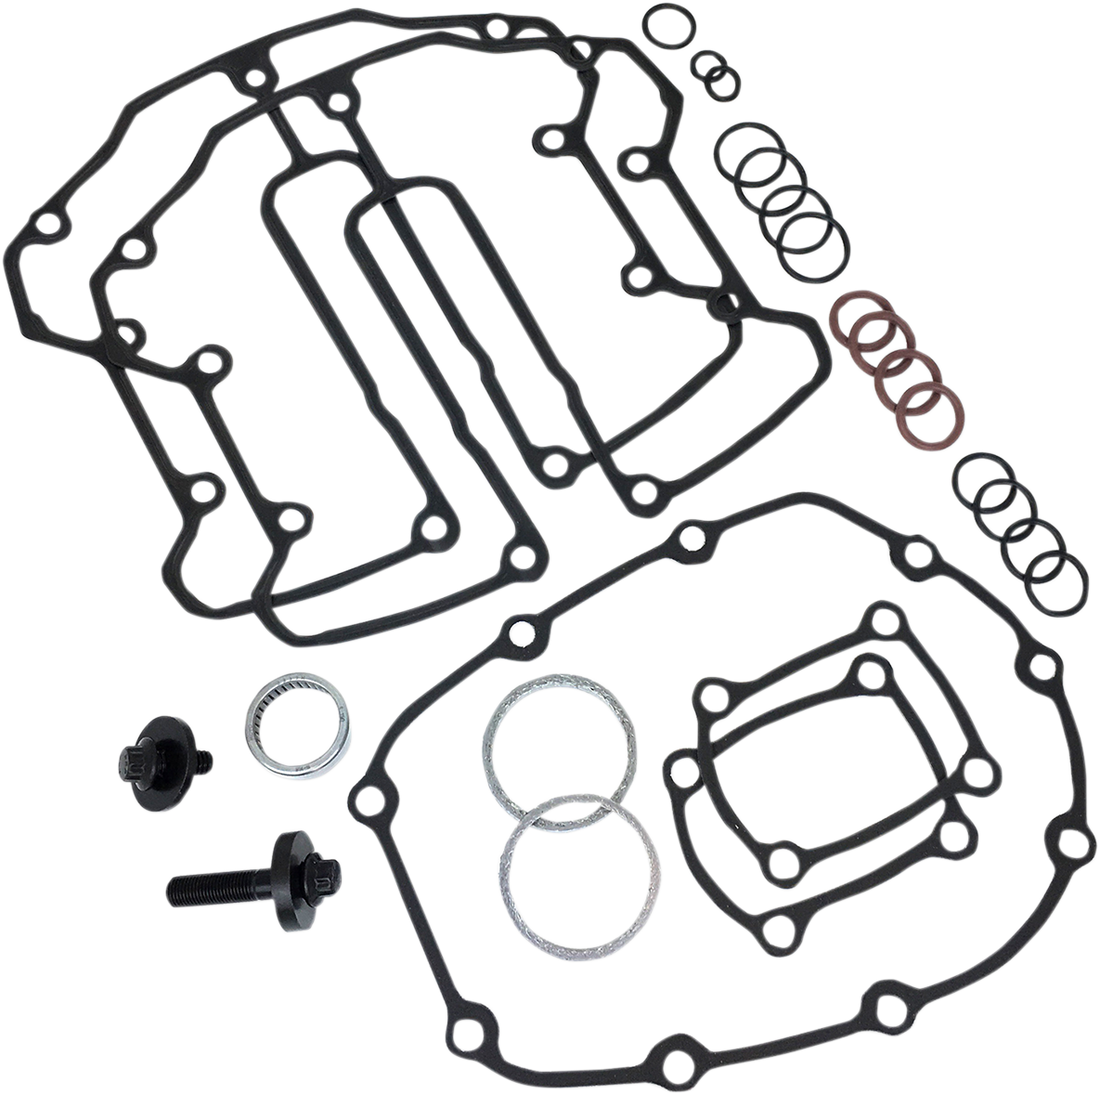 0934-5984 - FEULING OIL PUMP CORP. Top End Cam Install Kit - M8 2030